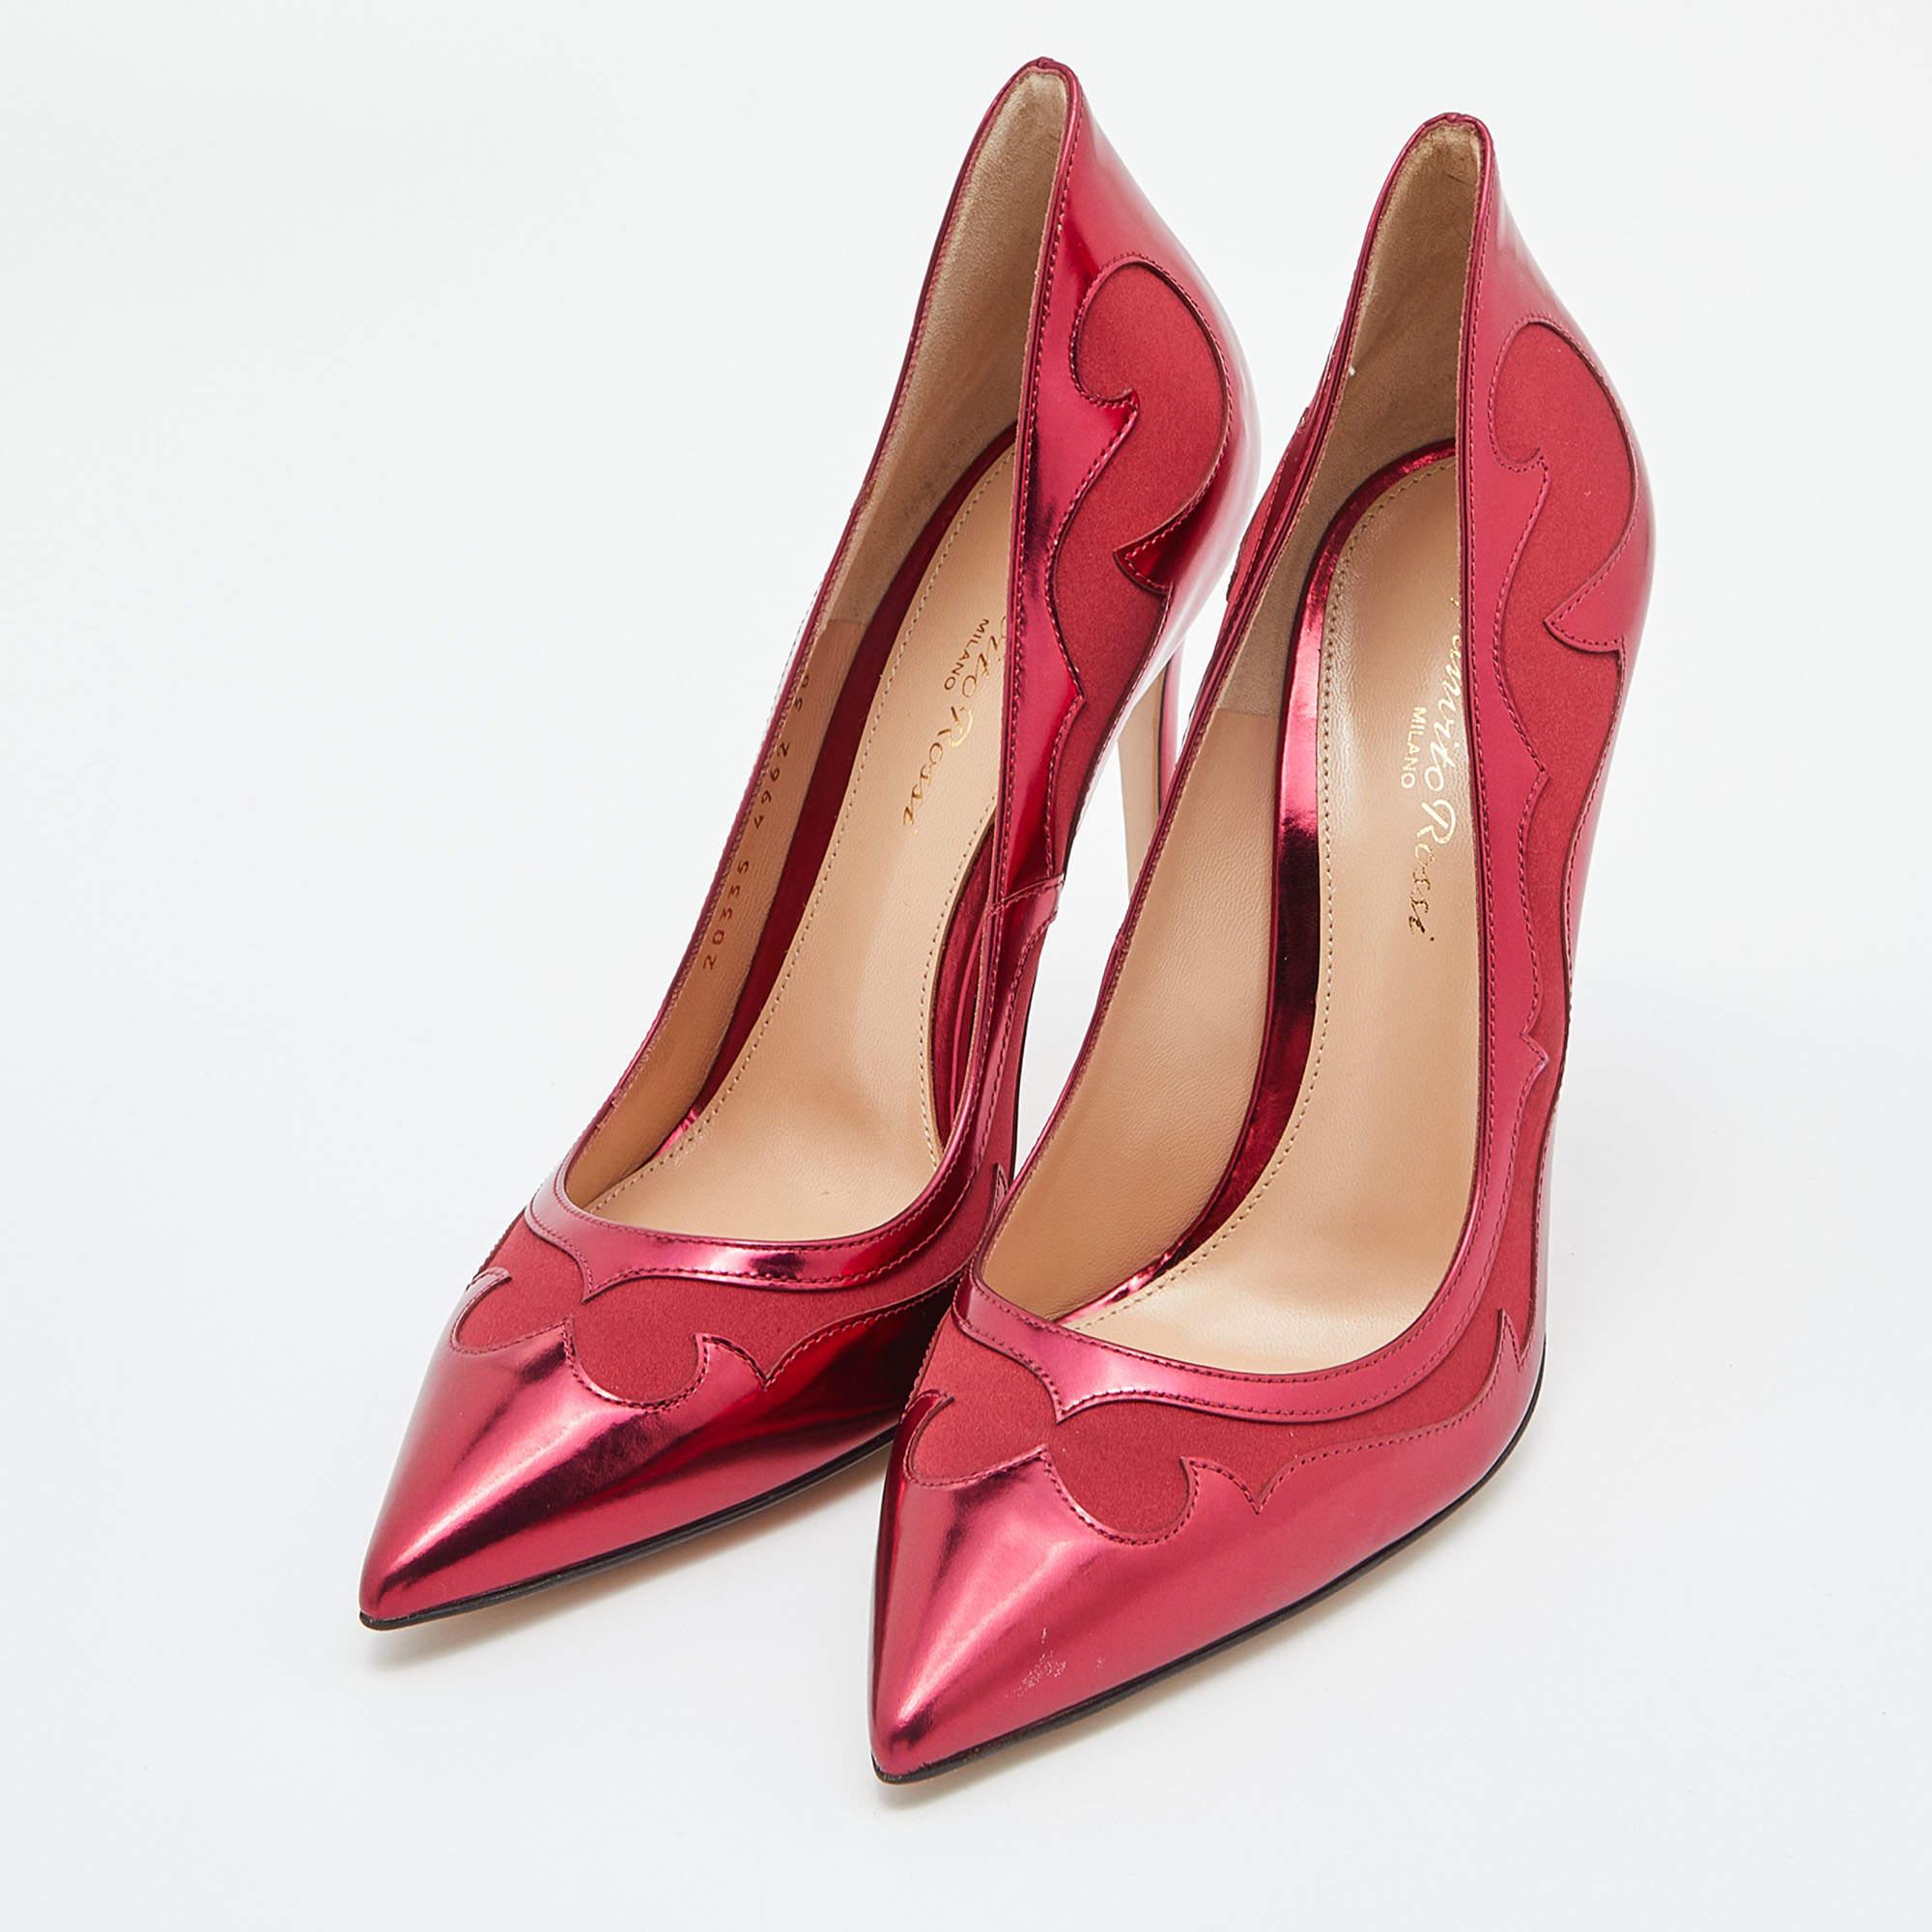 Gianvito Rossi Burgundy Laser Cut Leather and Satin Pointed Toe Pumps Size 38 In Good Condition In Dubai, Al Qouz 2